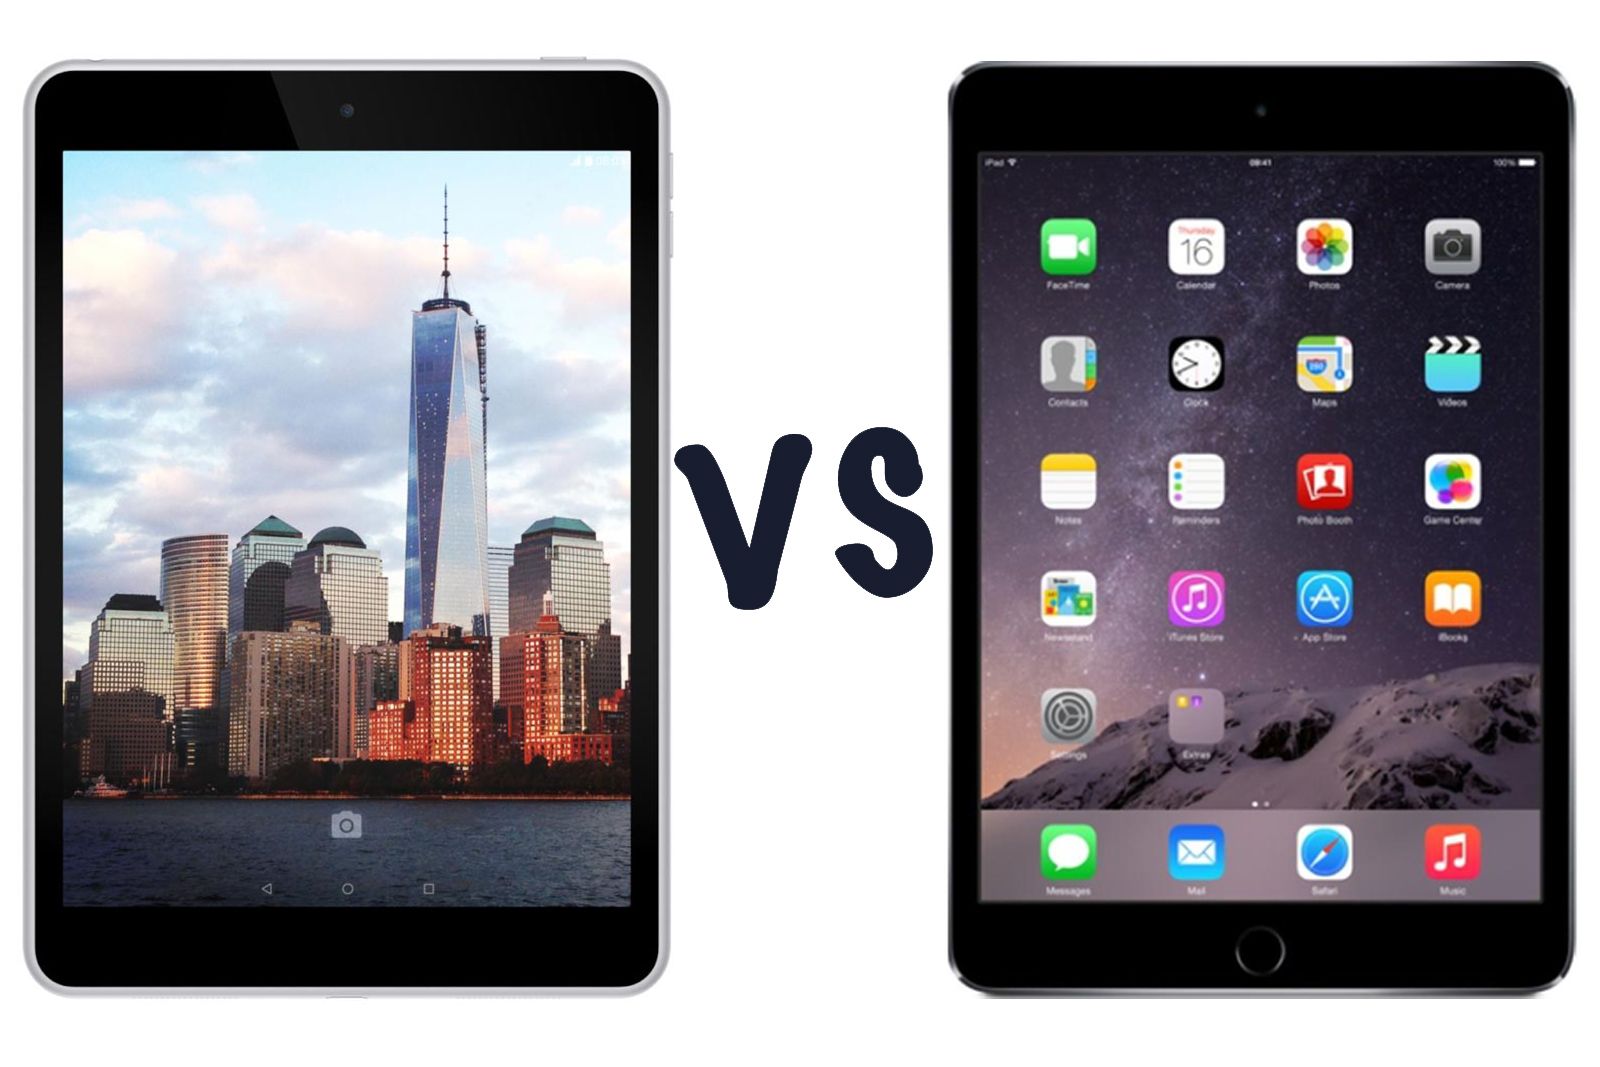 nokia n1 vs apple ipad mini 3 what s the difference  image 1